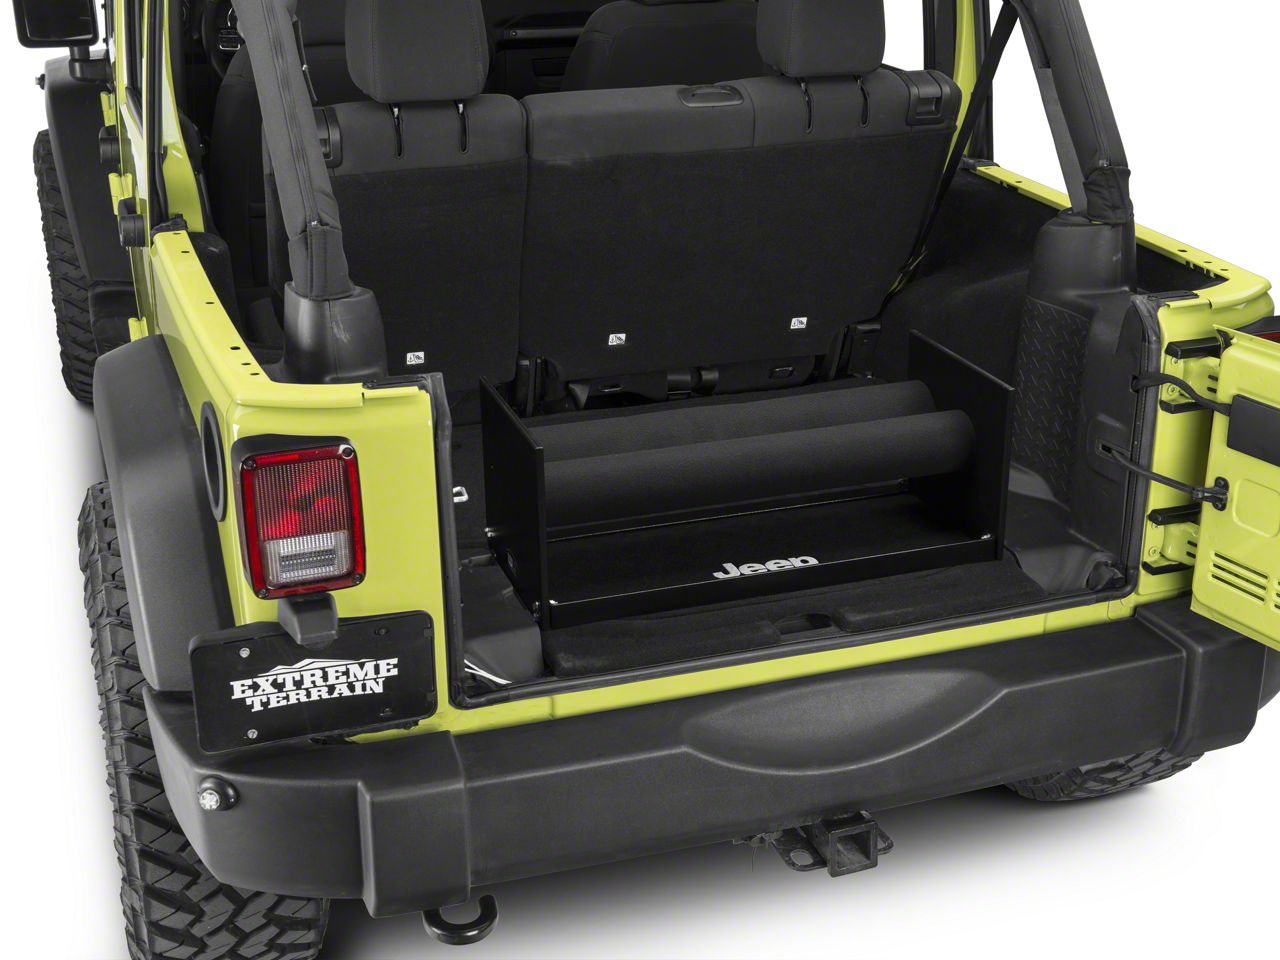 Fits Jeep Wrangler JK 4-Door Unlimited 2007-2018 Protect Windows from UV Damaged and Scratches Clover Patch Soft Top Window Roll Storage 